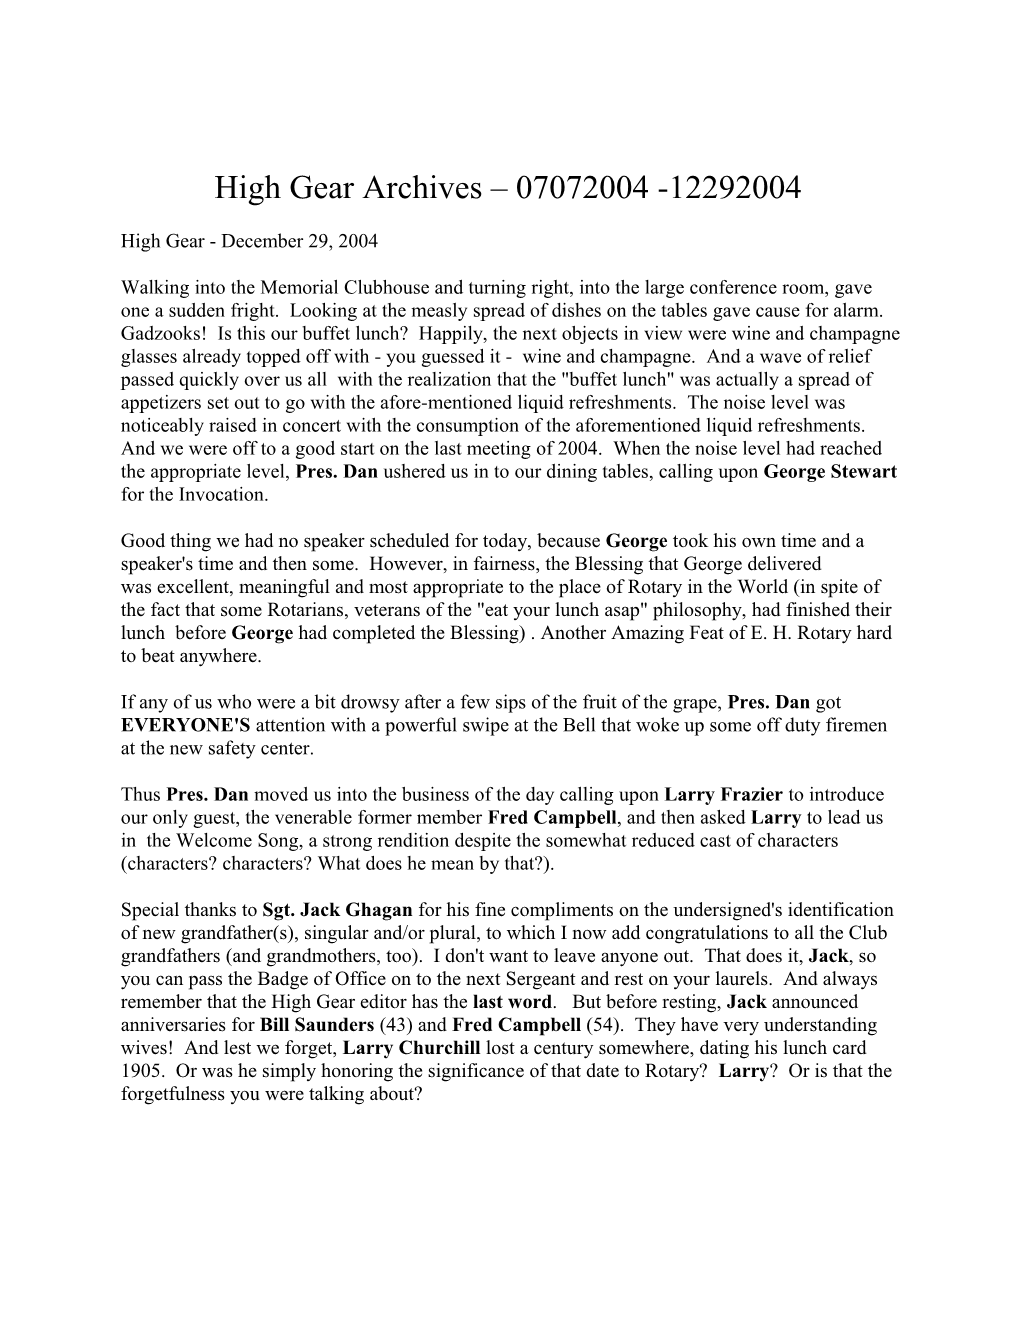 High Gear Archives 07072004 -12292004